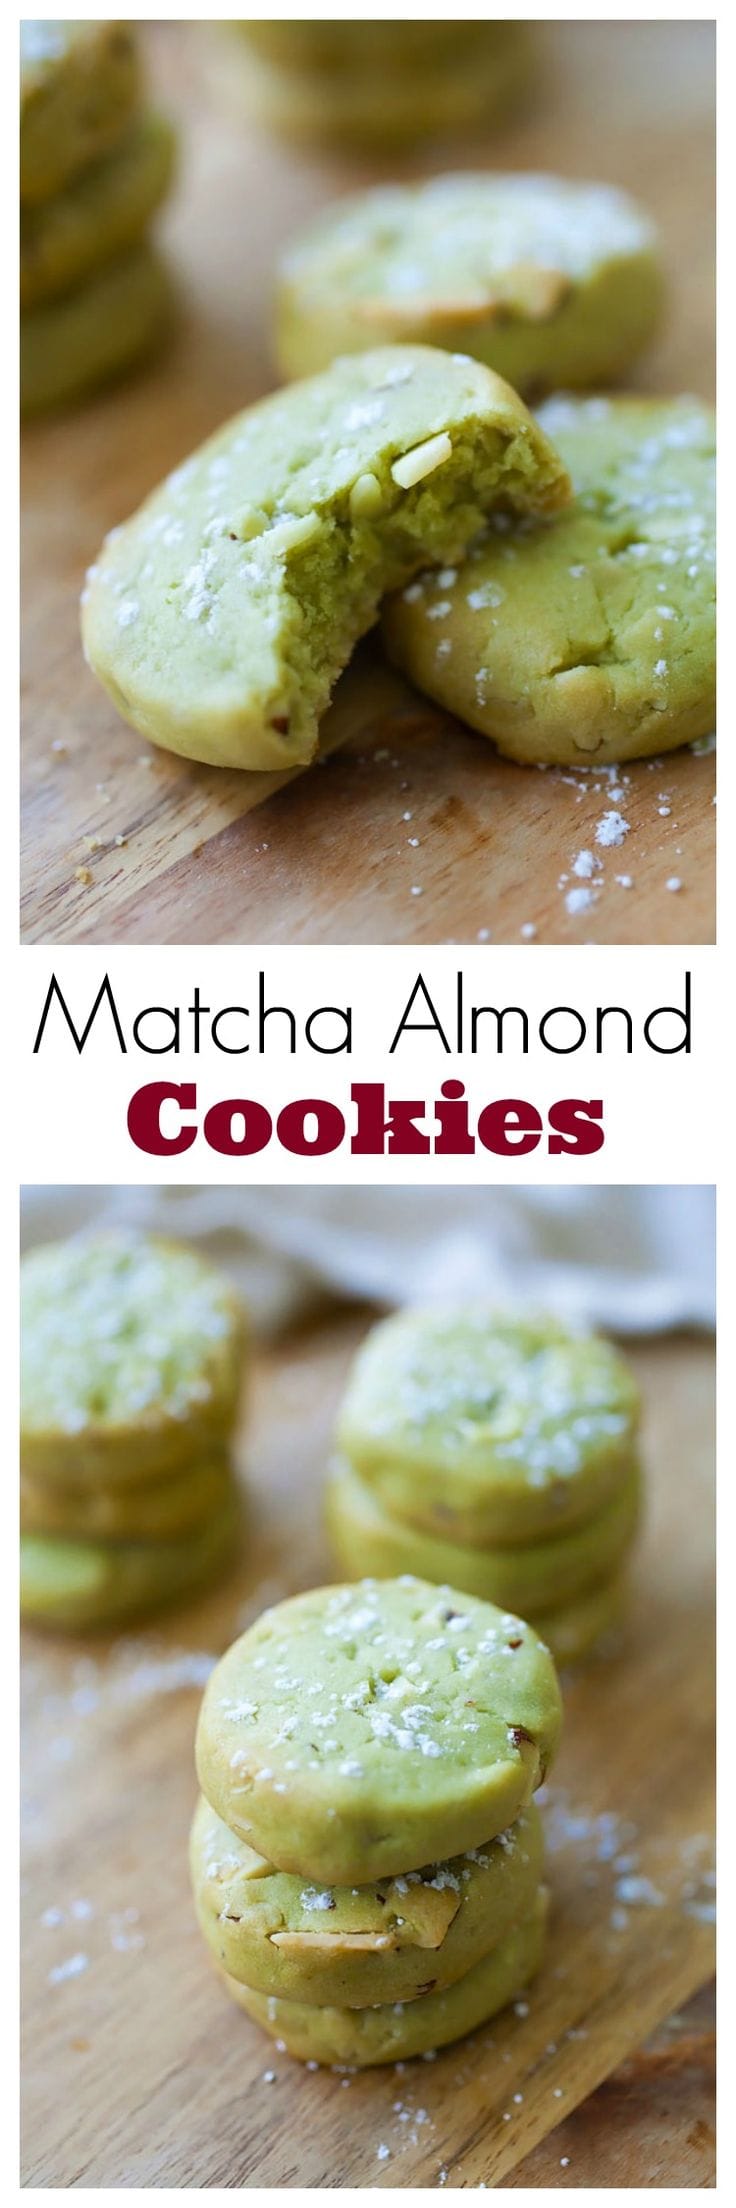 Matcha cookies with almond – buttery and crumbly Japanese matcha (green tea) cookies with almond. Super easy matcha cookies recipe that anyone can make | rasamalaysia.com